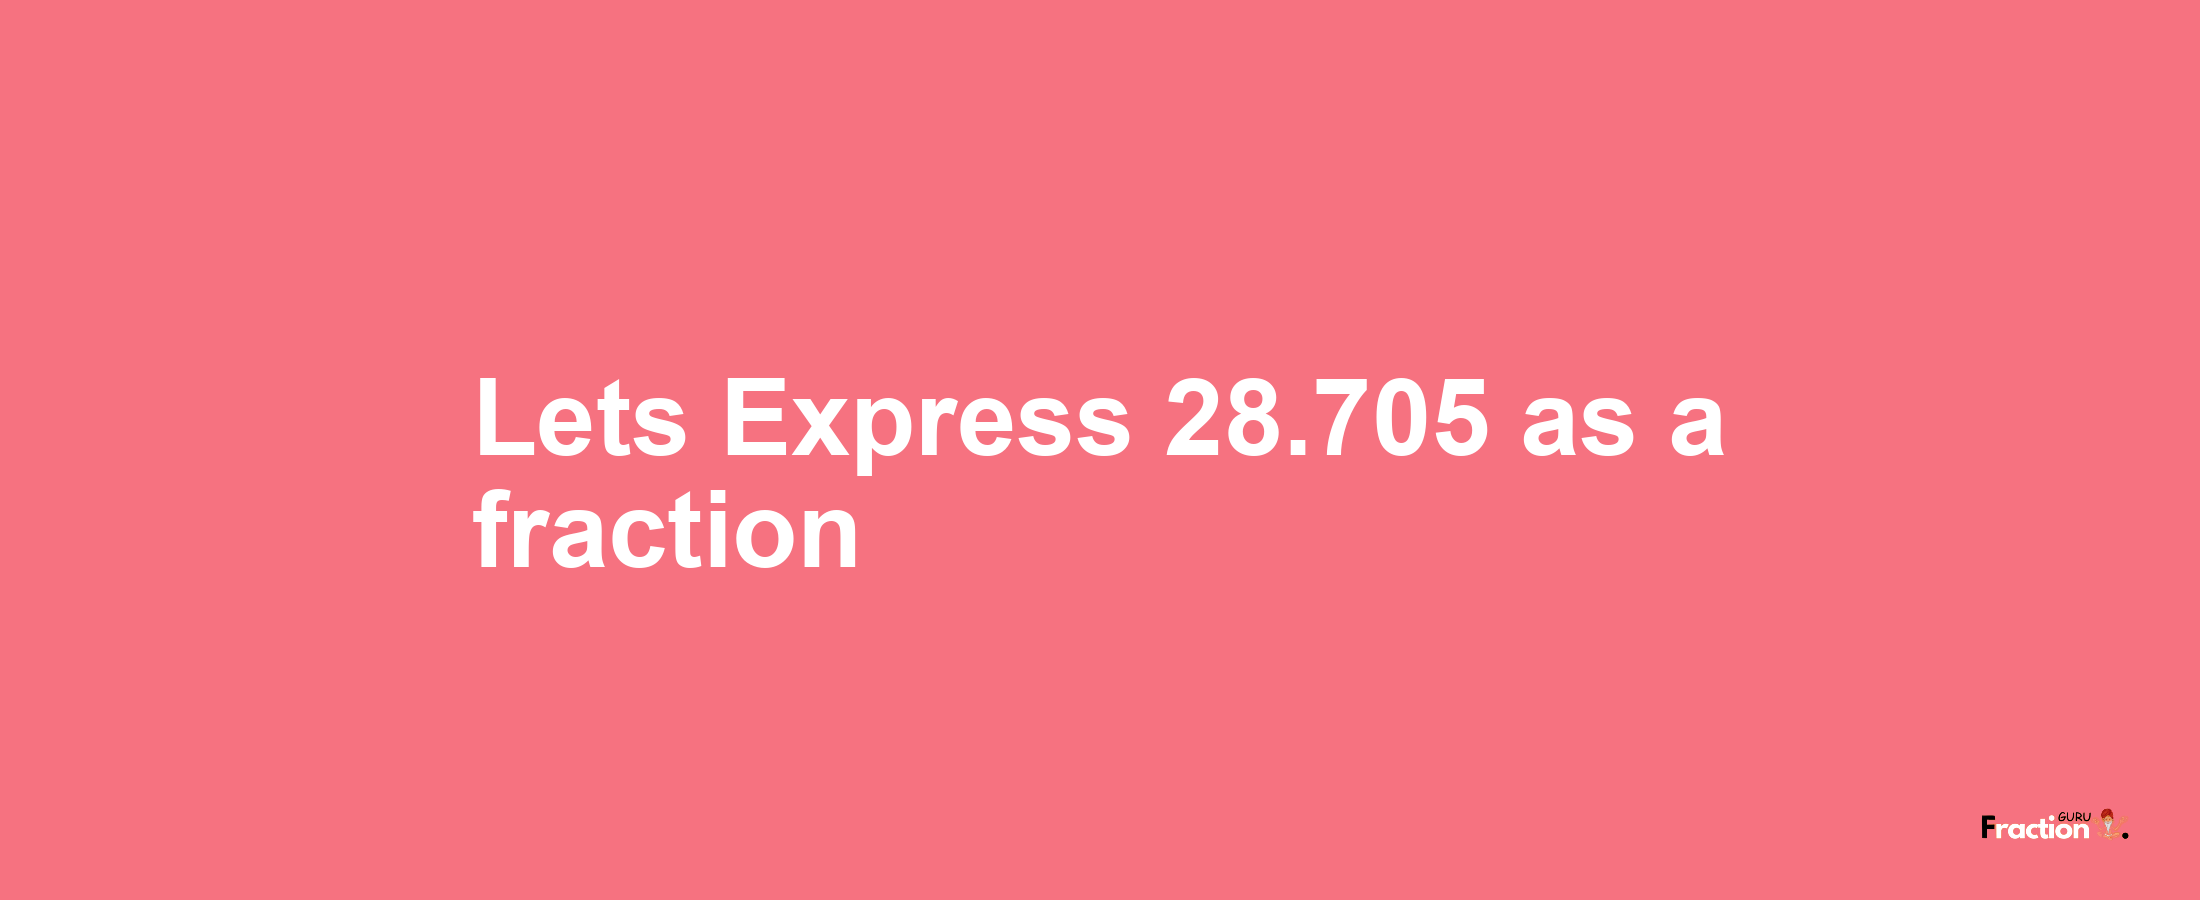 Lets Express 28.705 as afraction